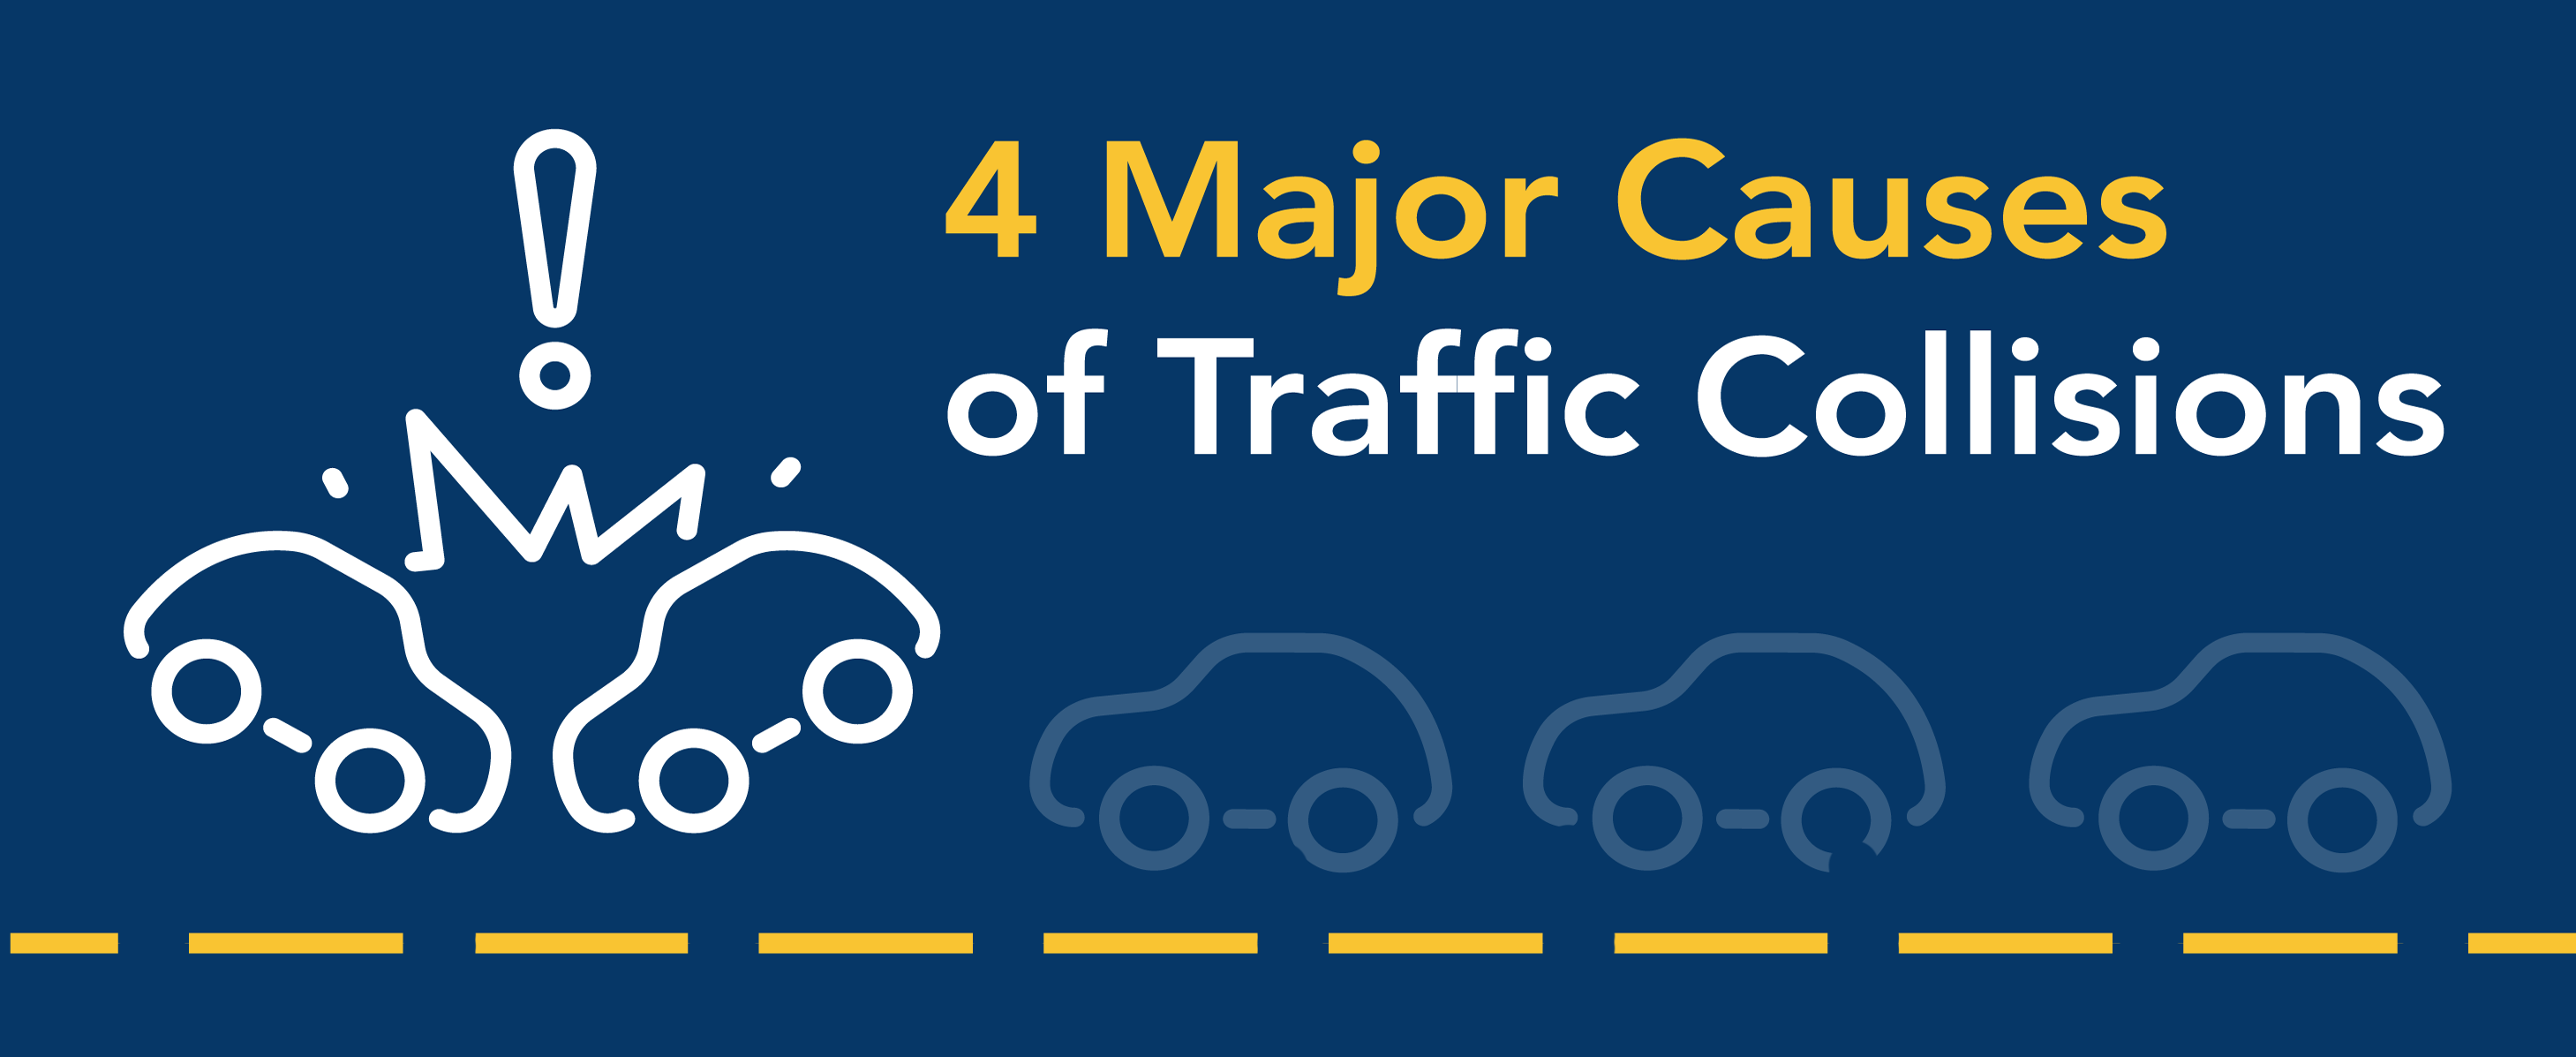 4 major causes of traffic collisions.